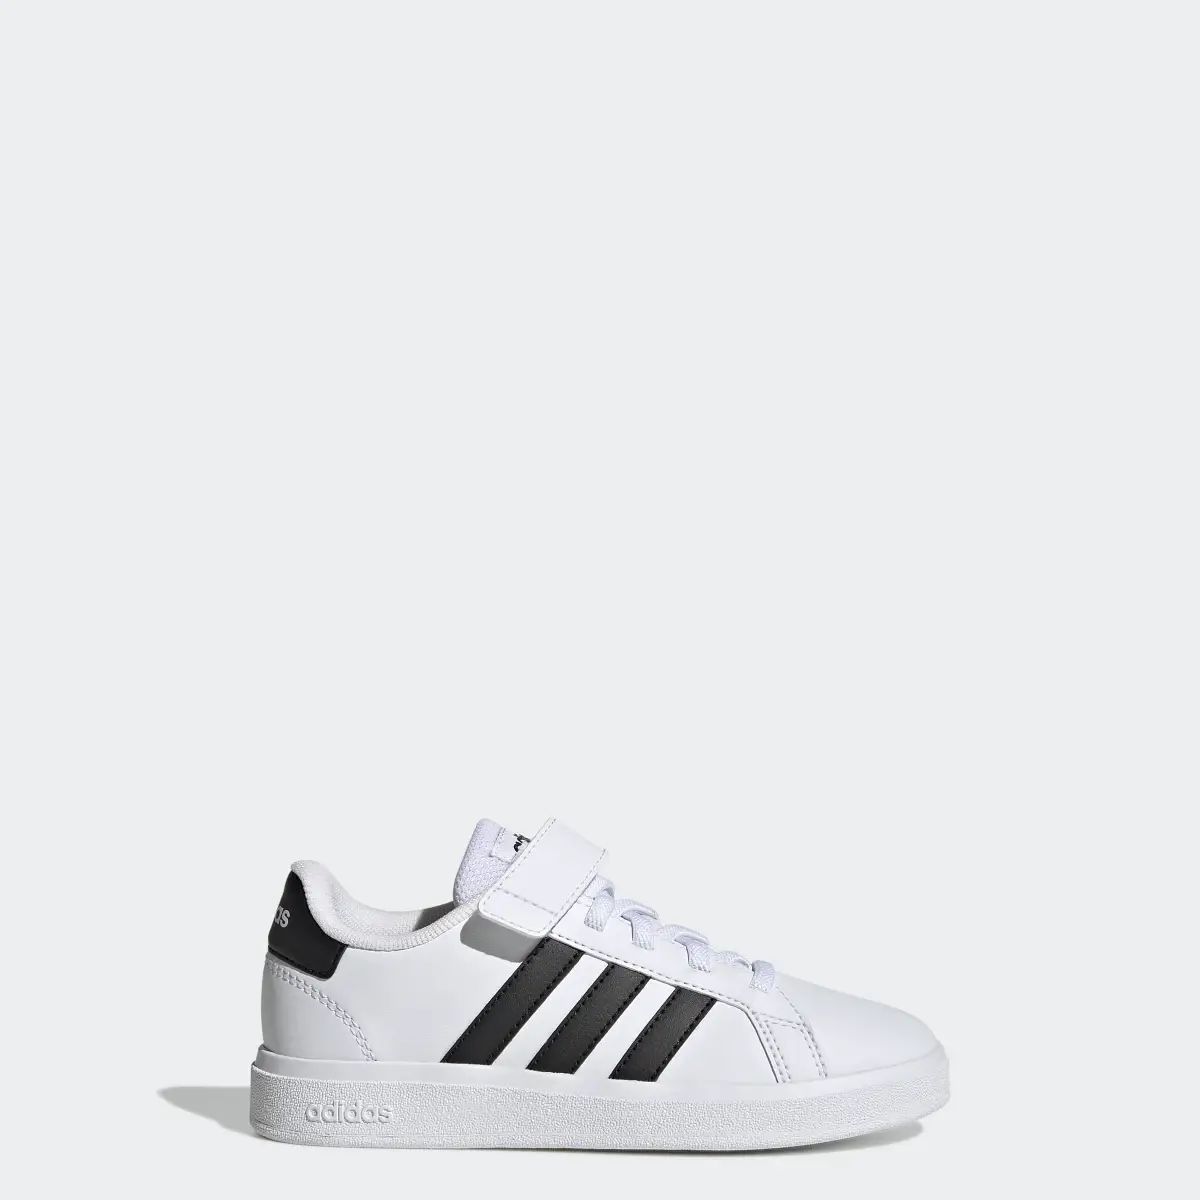 Adidas Grand Court Elastic Lace and Top Strap Shoes. 1